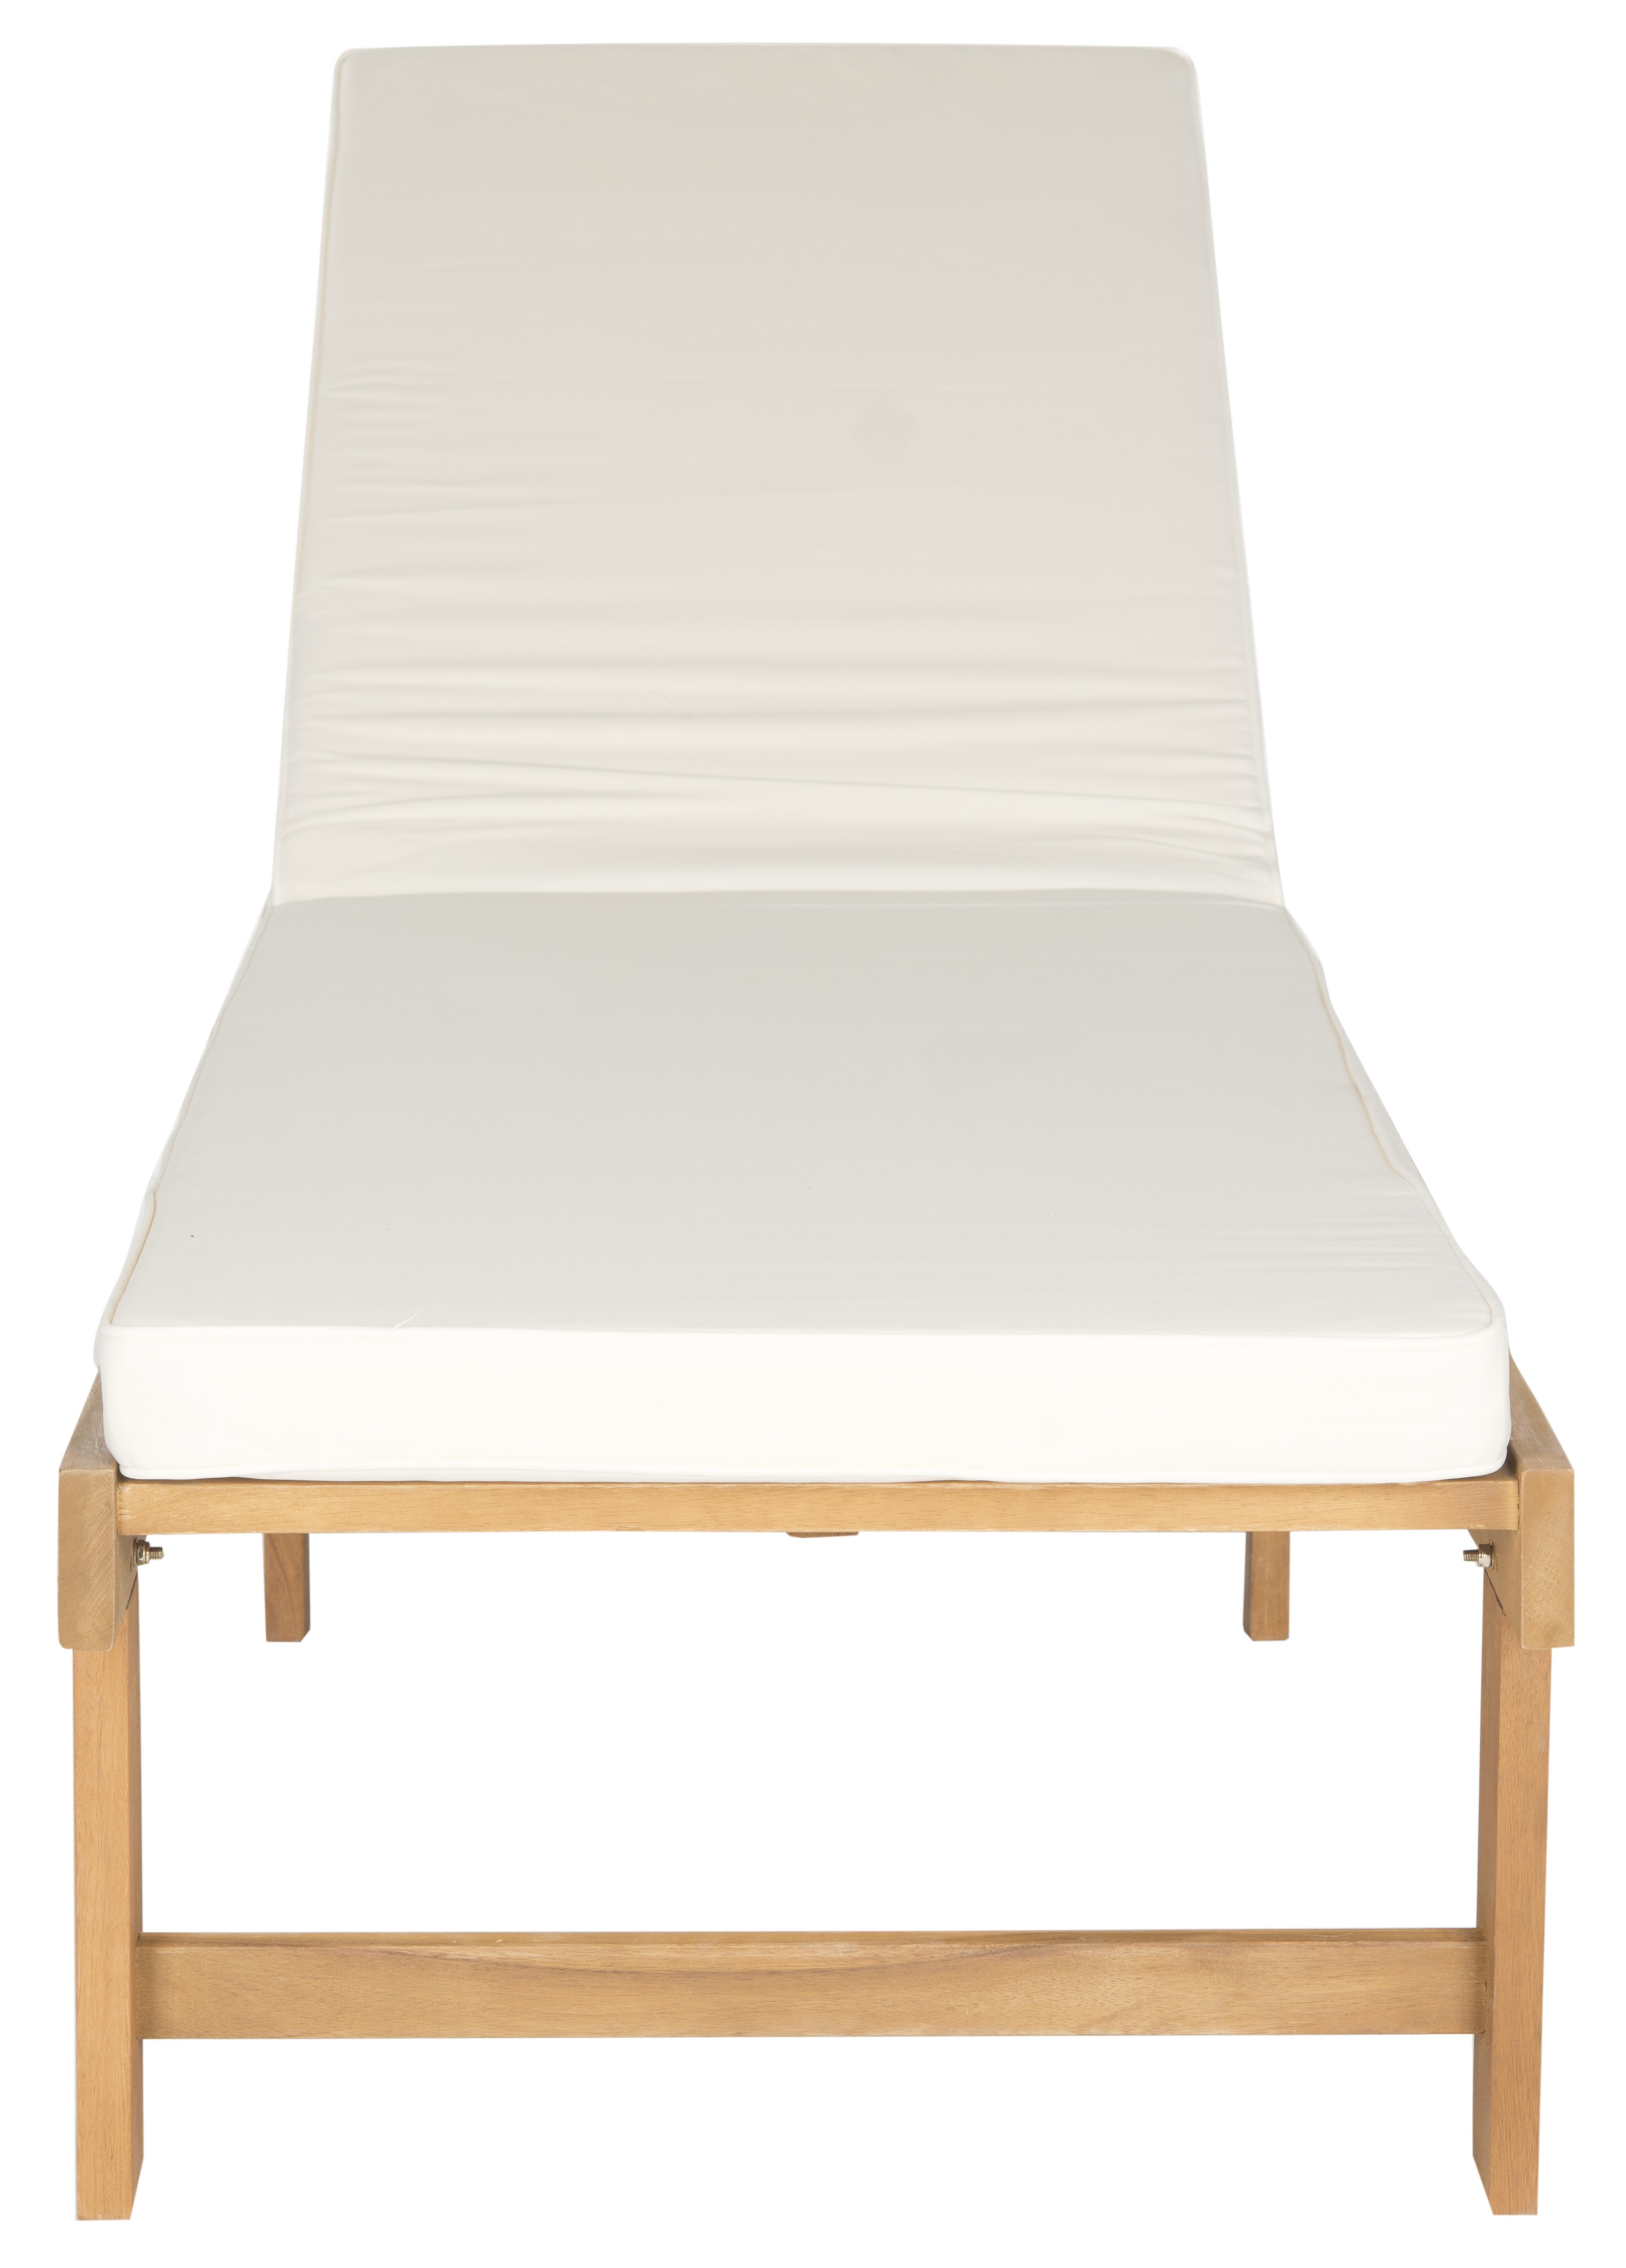 Inglewood Chaise Lounge Chair - Natural/Beige - Safavieh - Image 1